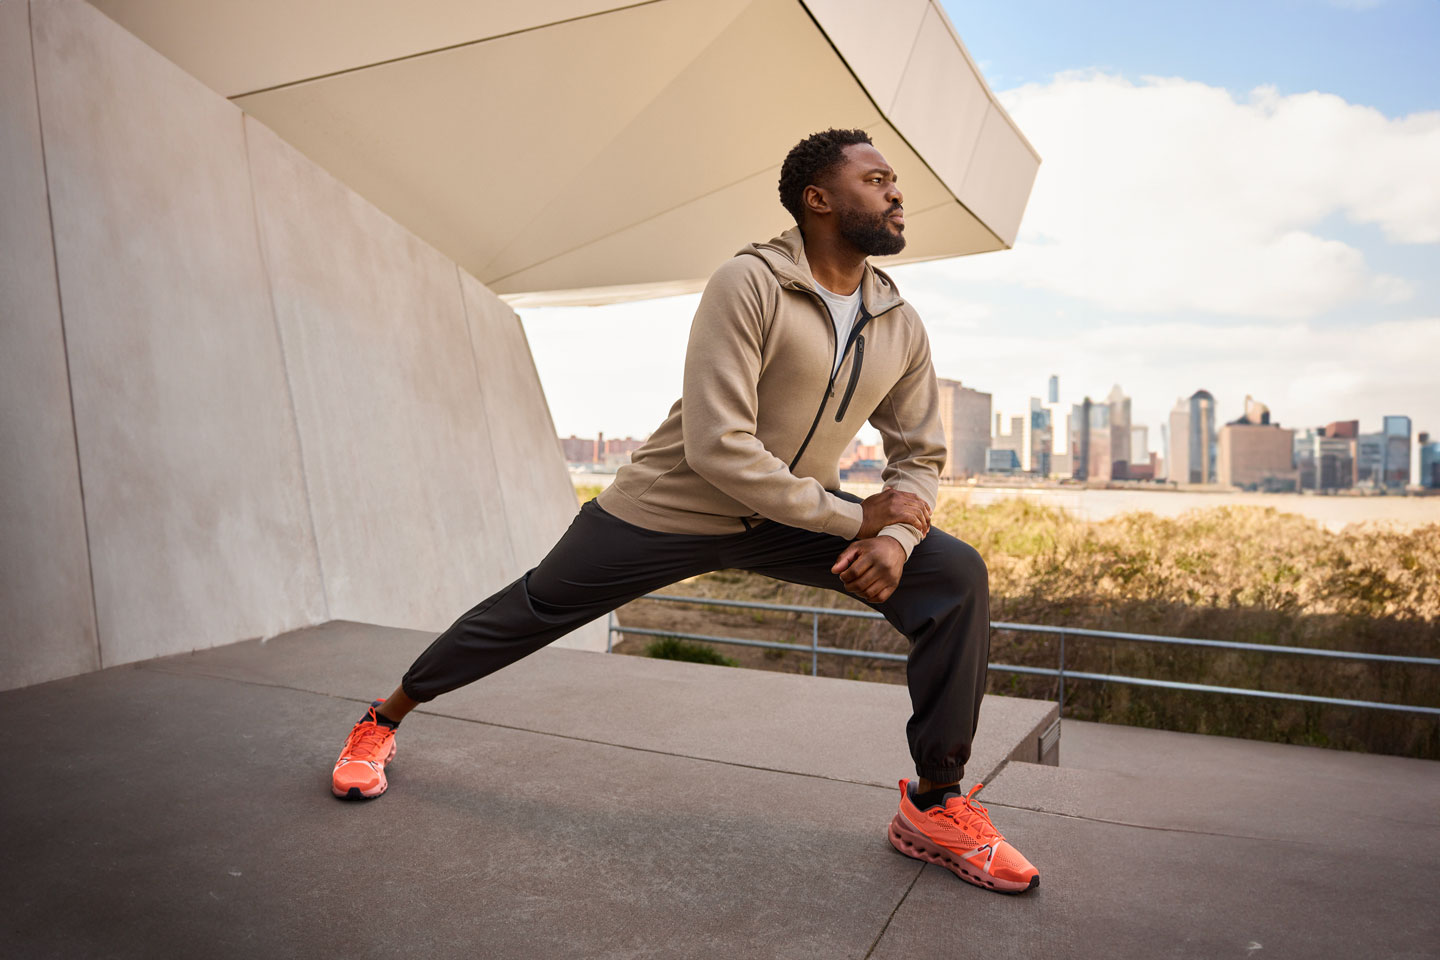 Dr. Kola Jegede wearing running attire, stretching in a forward lunge atop a concrete structure with city skyline behind him